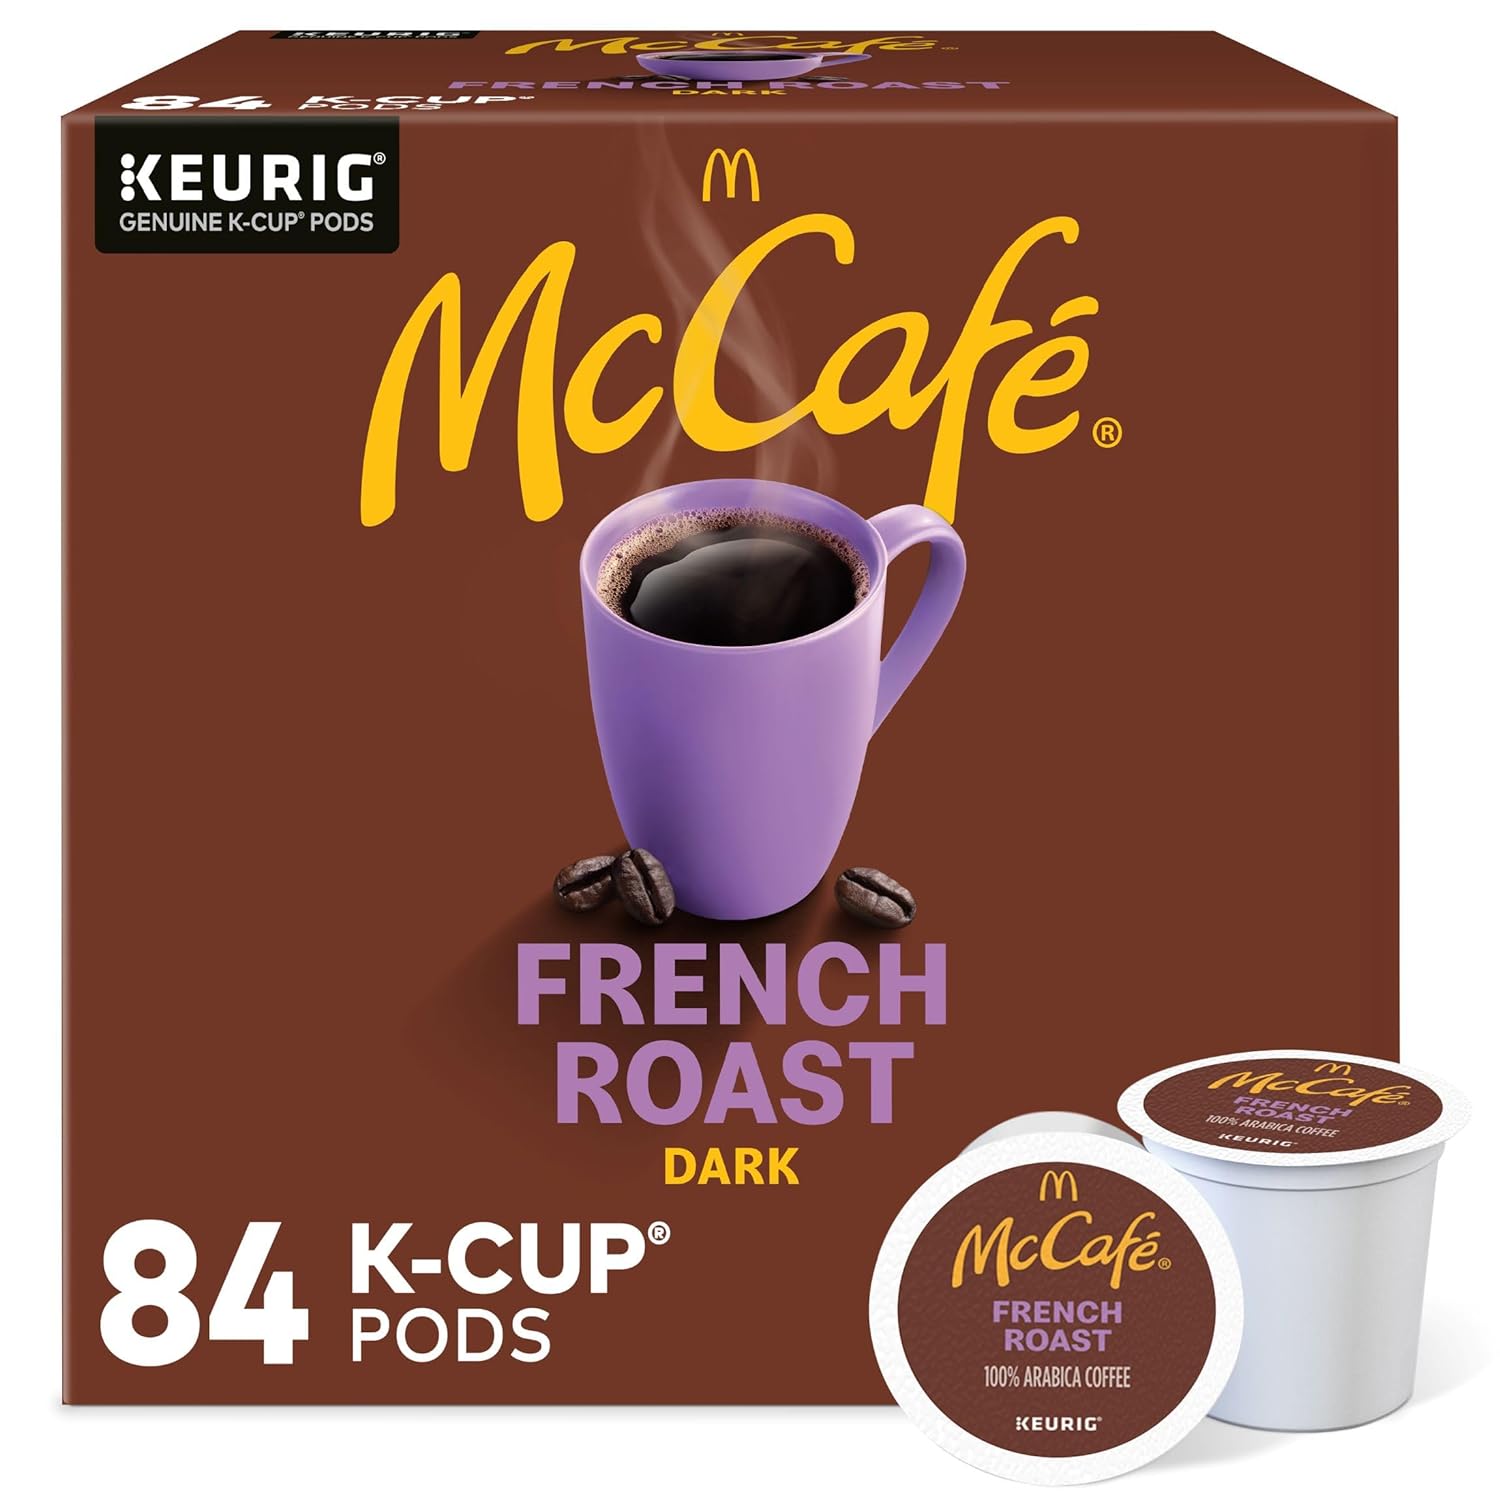 McCafe French Roast K-Cup Coffee Pods , 84 Count (Pack of 1)